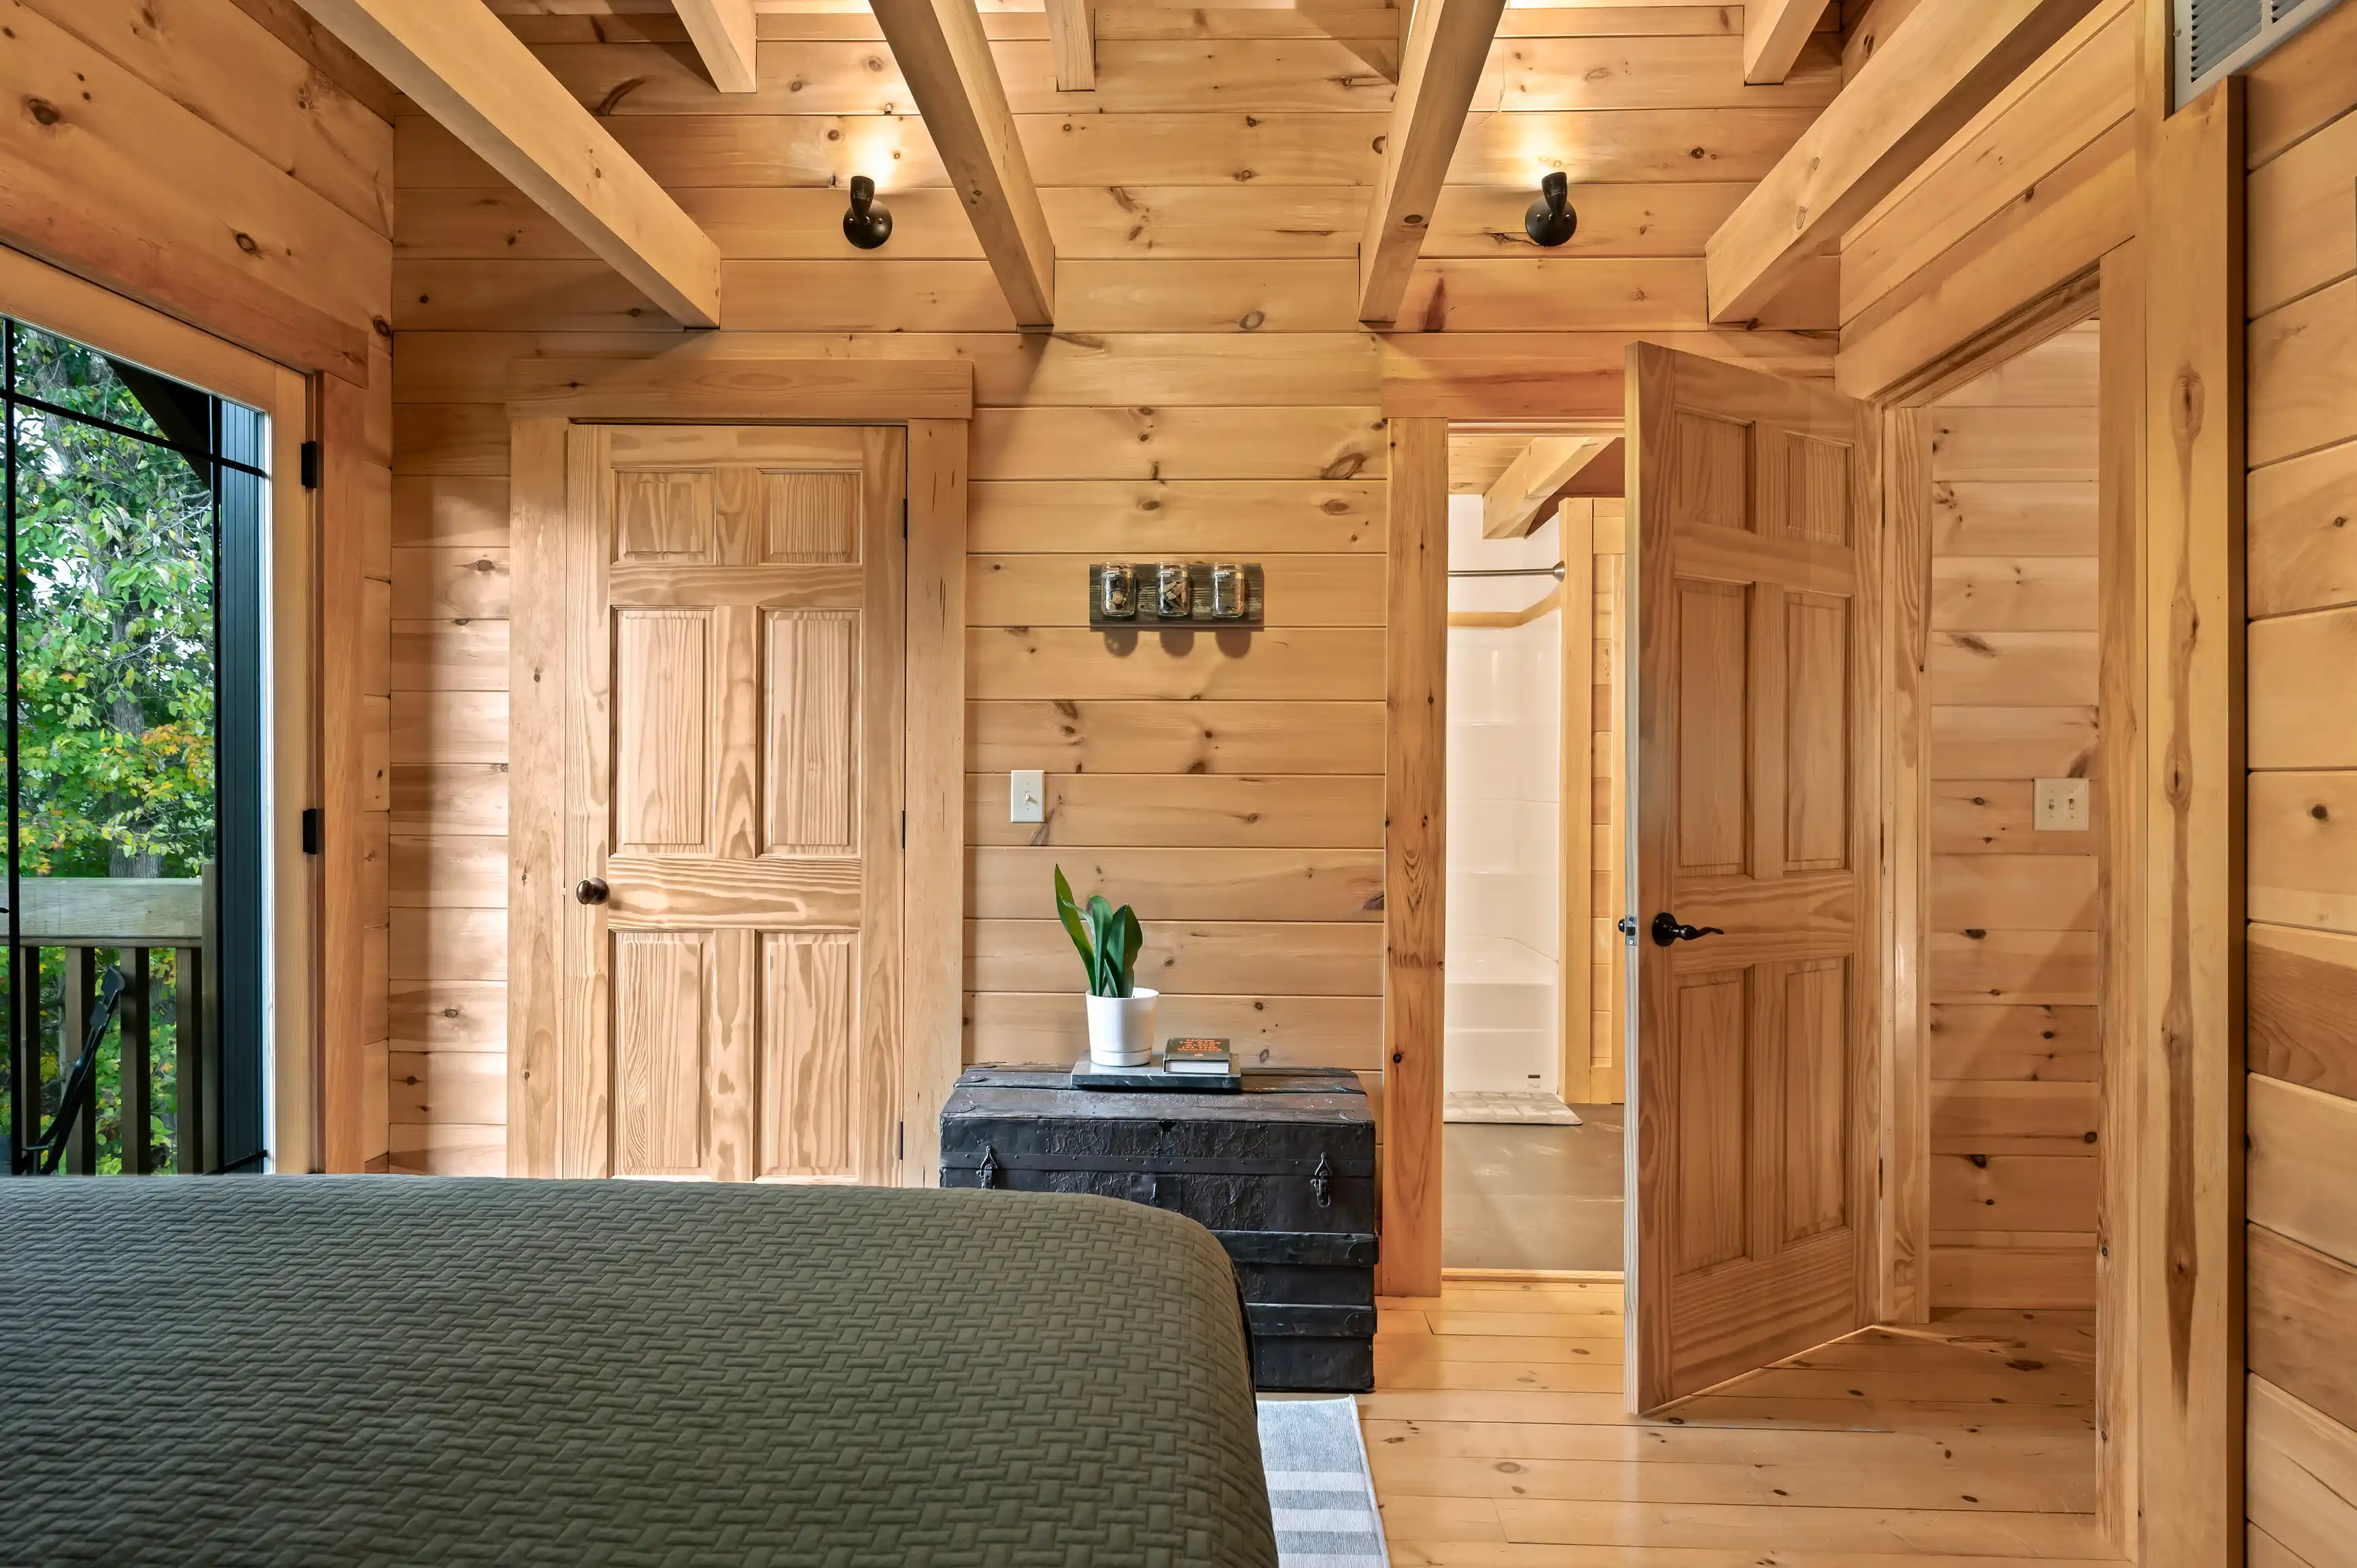 Interior view of a cozy cabin bedroom with wooden walls, a glimpse of a bed, open doors to a bathroom, and natural light from a glass door leading to a balcony.